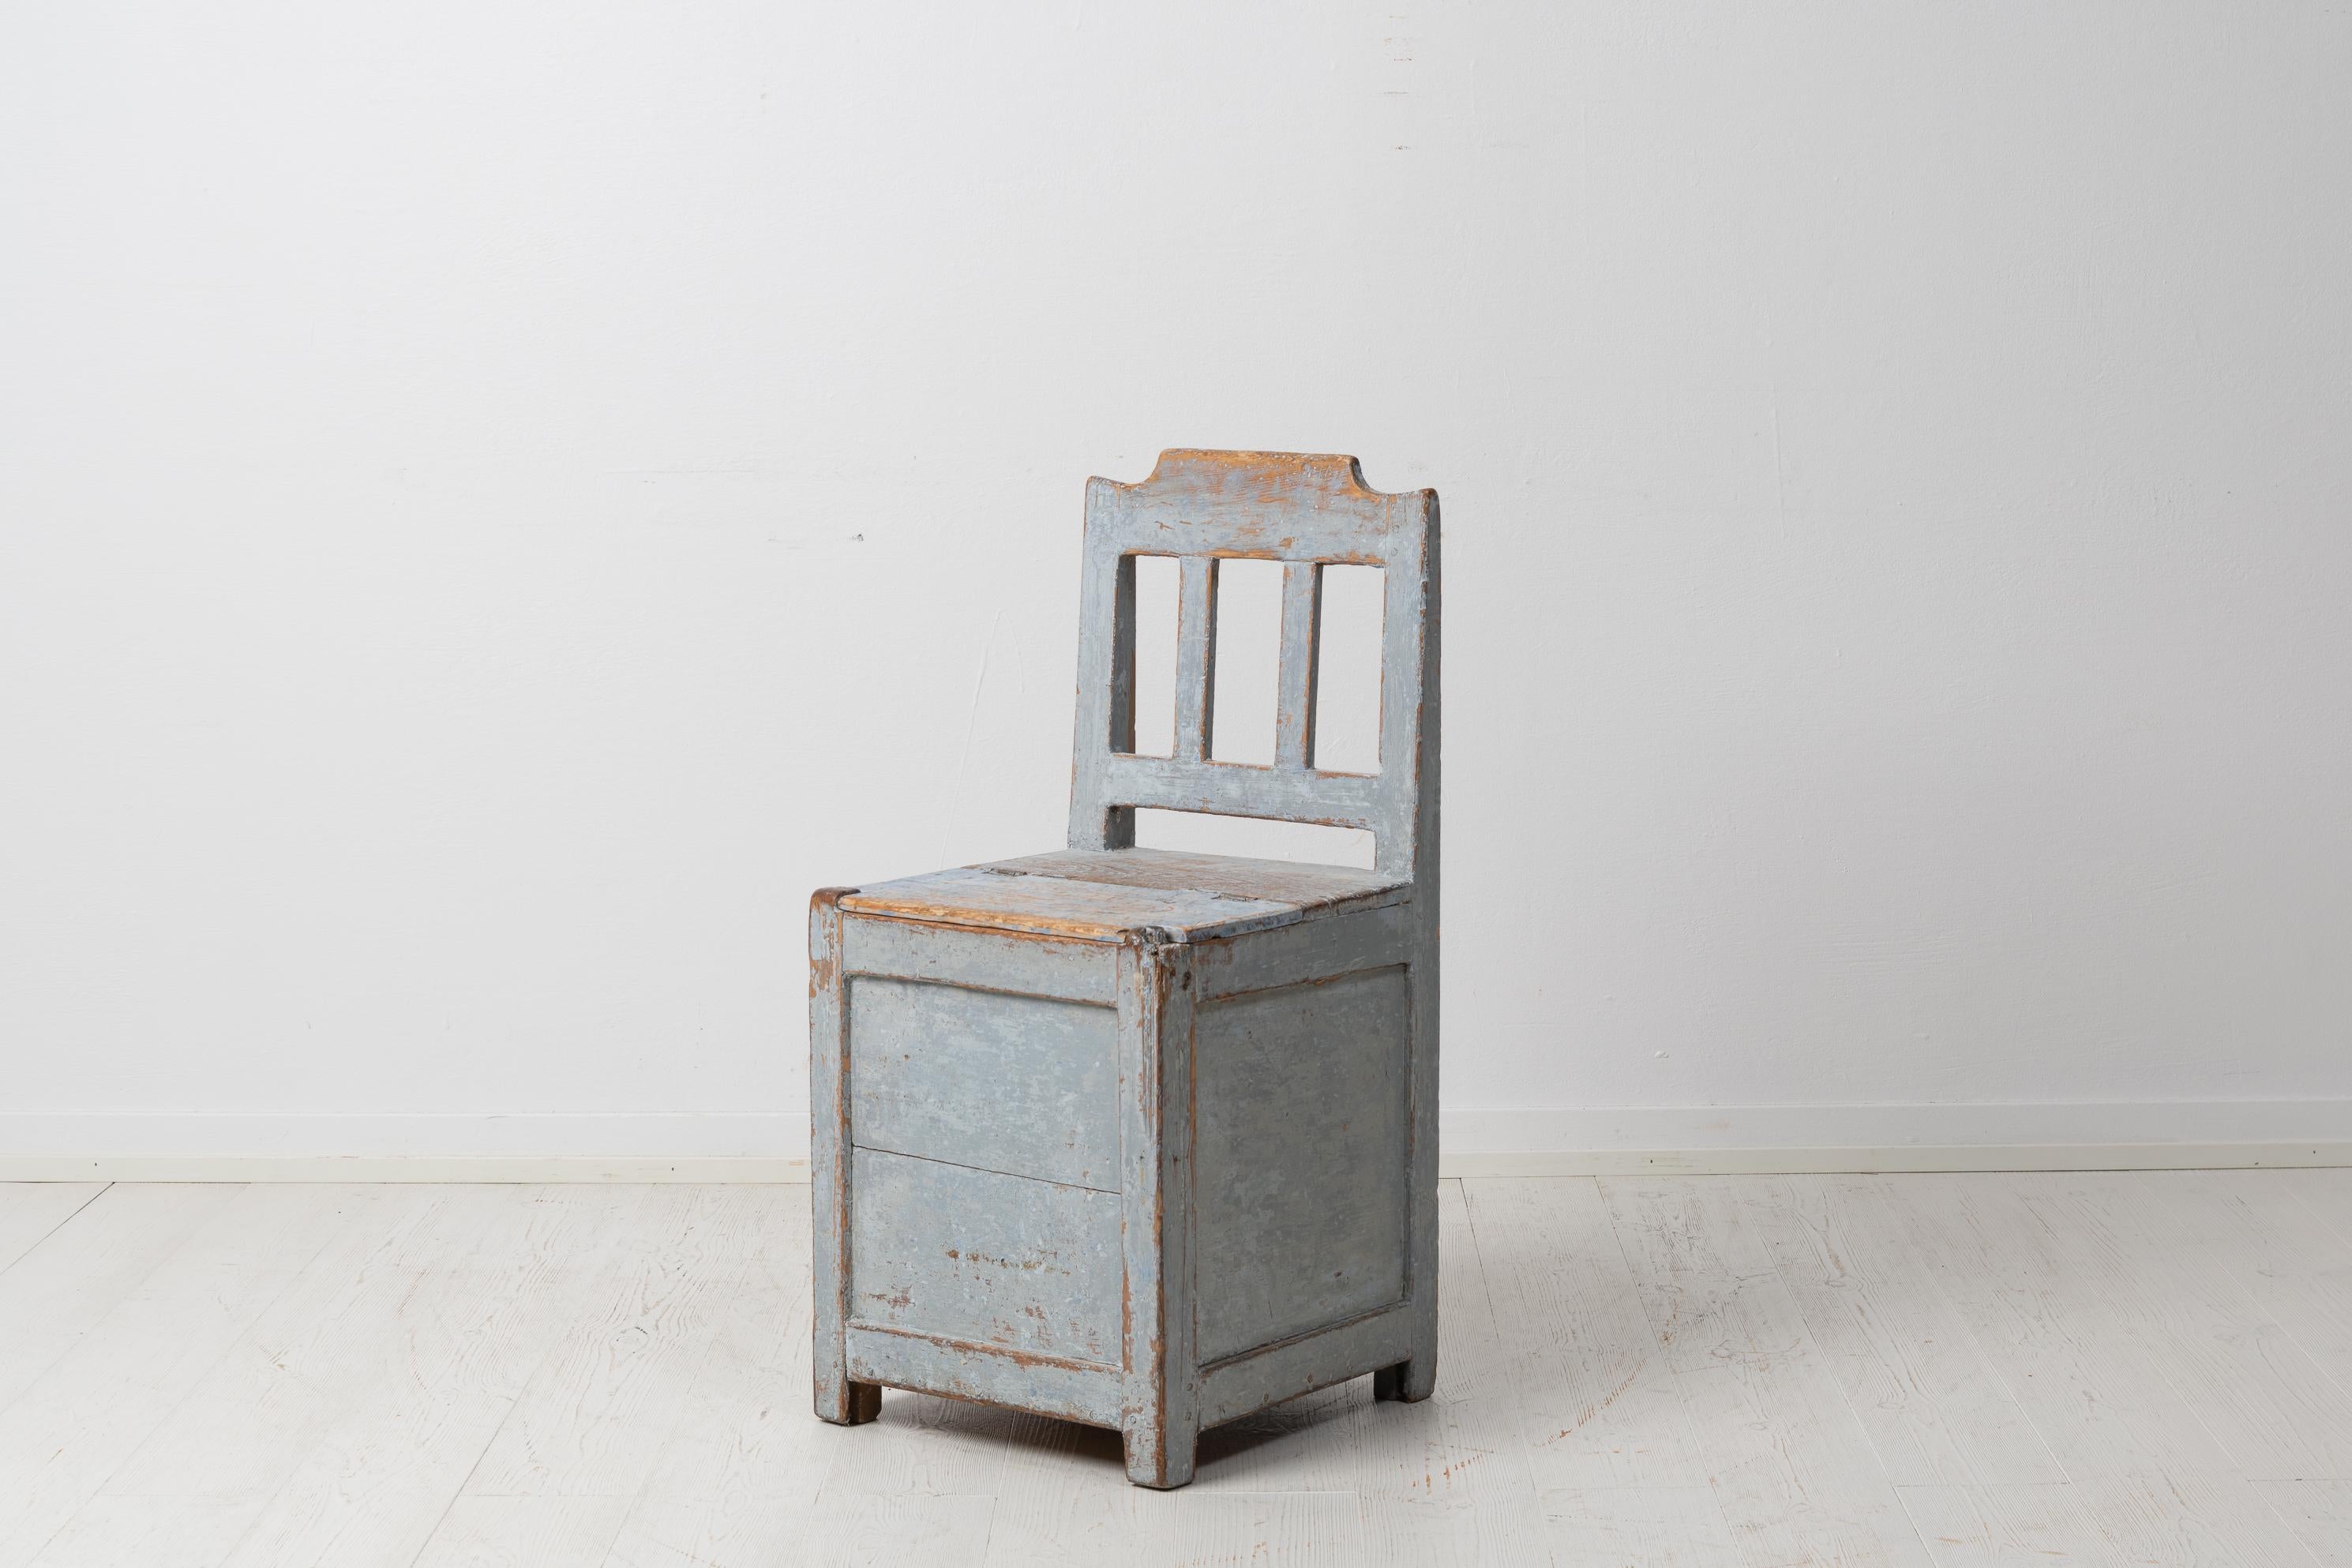 Antique folk art chair from Sweden made around 1860 in painted pine. The chair has the original paint with a time-worn distressed patina. The chair had a very particular function in Northern Sweden. We usually experience very cold winters so during